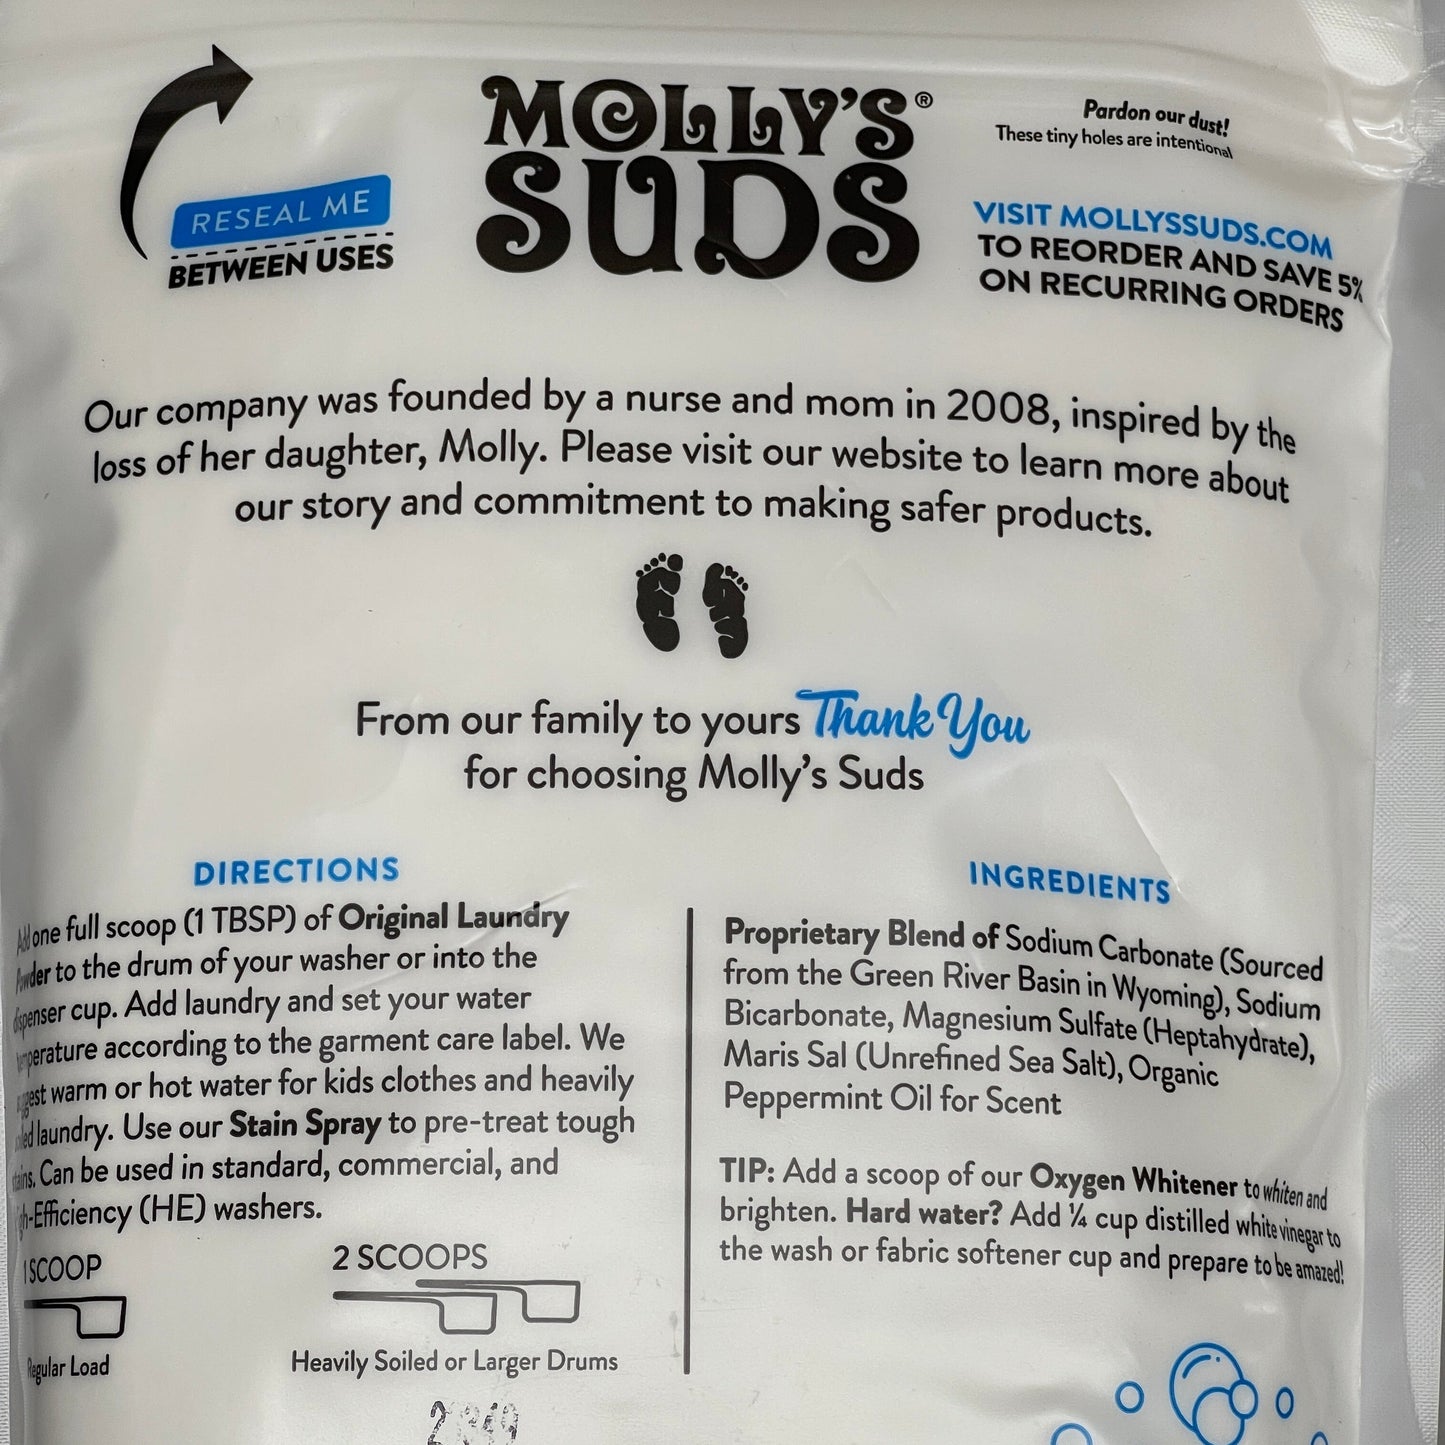 ZA@ MOLLY'S SUDS (3 PACK) Original Laundry Powder Ultra-Concentrated Peppermint 79 oz 120 Loads A